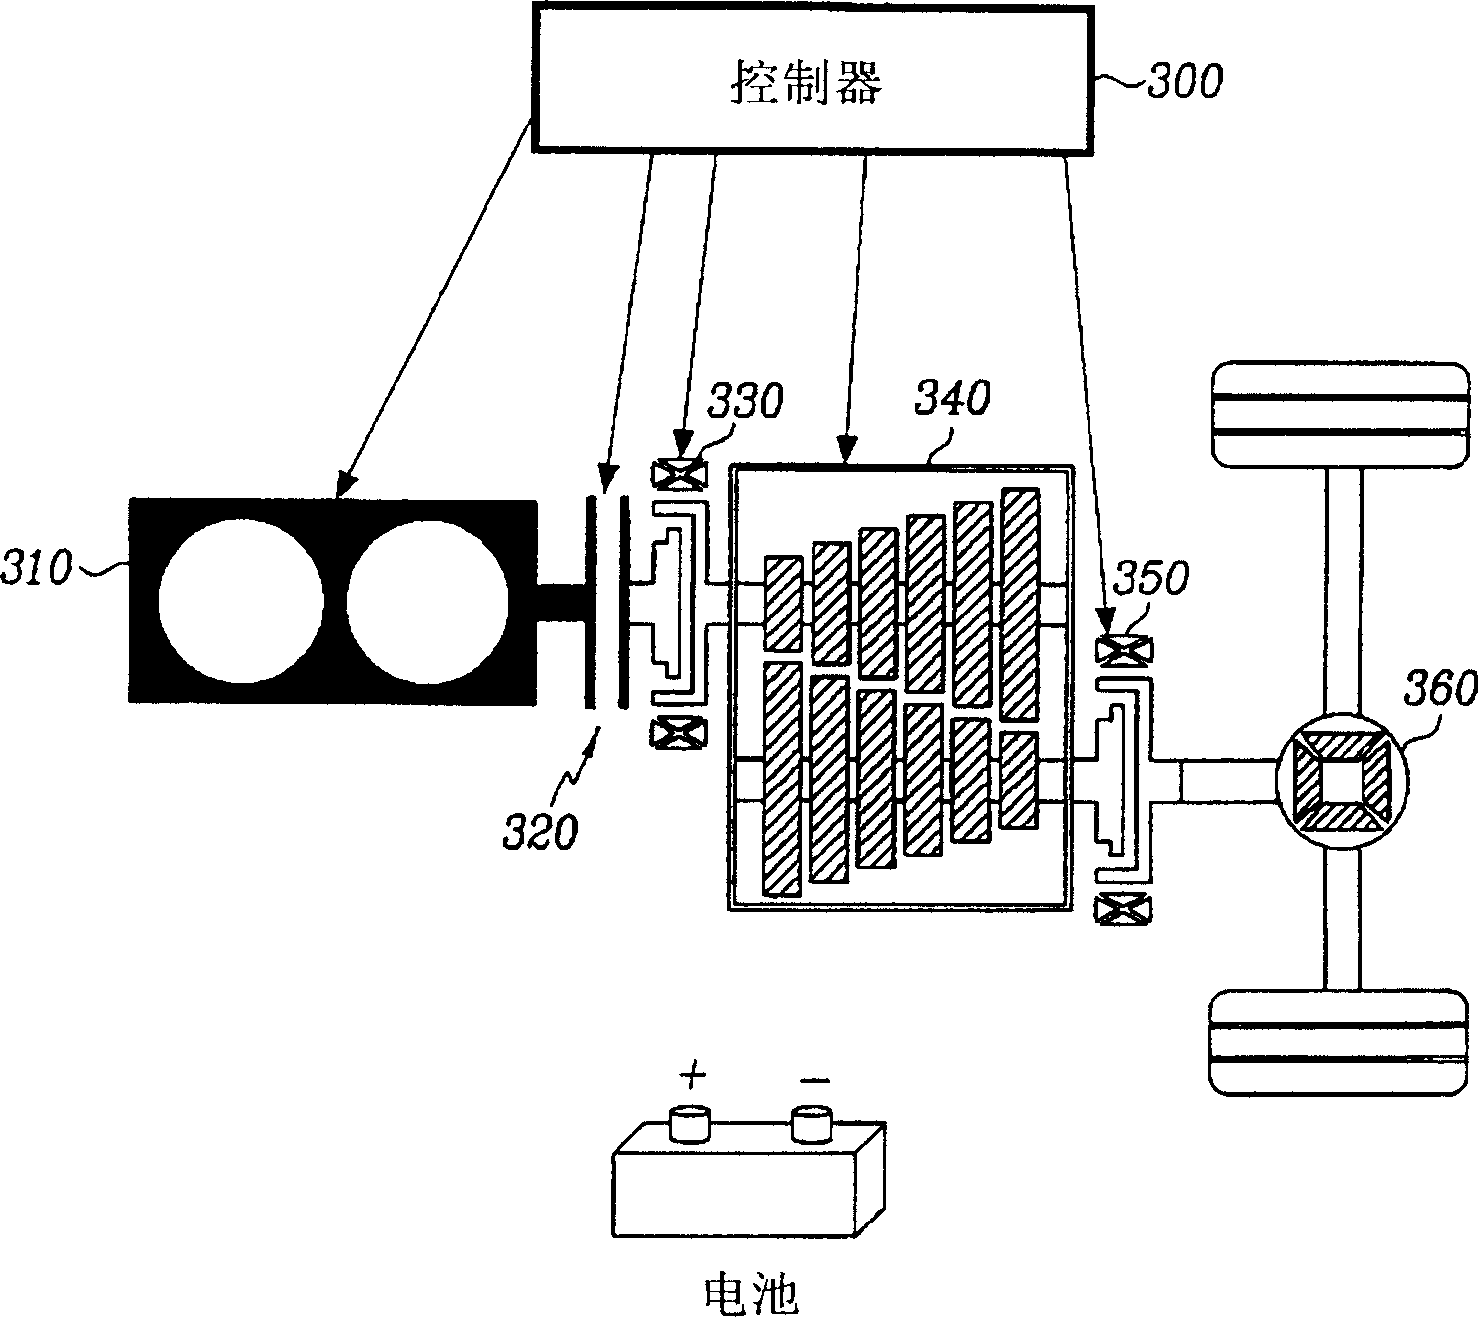 Powertrain system of hybrid electric vehicle